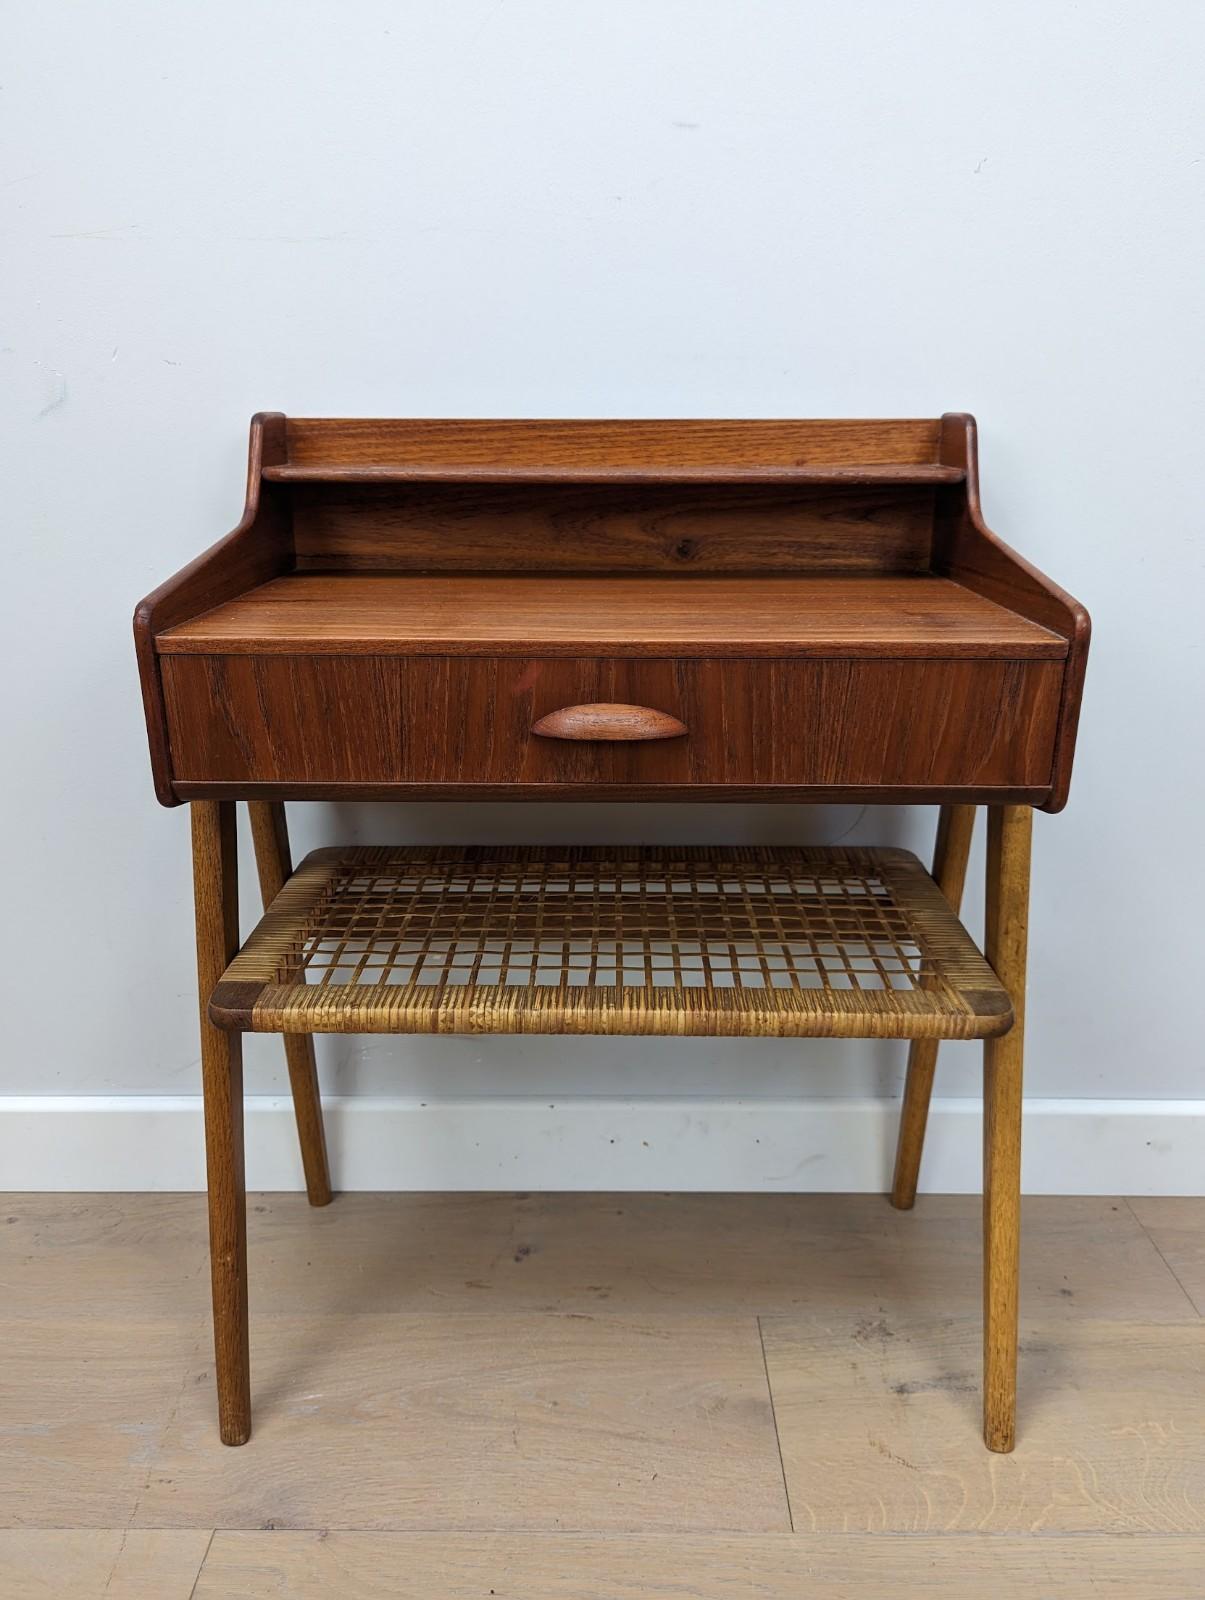 Midcentury Danish consol/bedside/telephone table Søren Rasmussen.

Made out of Teak with a woven cane shelf.